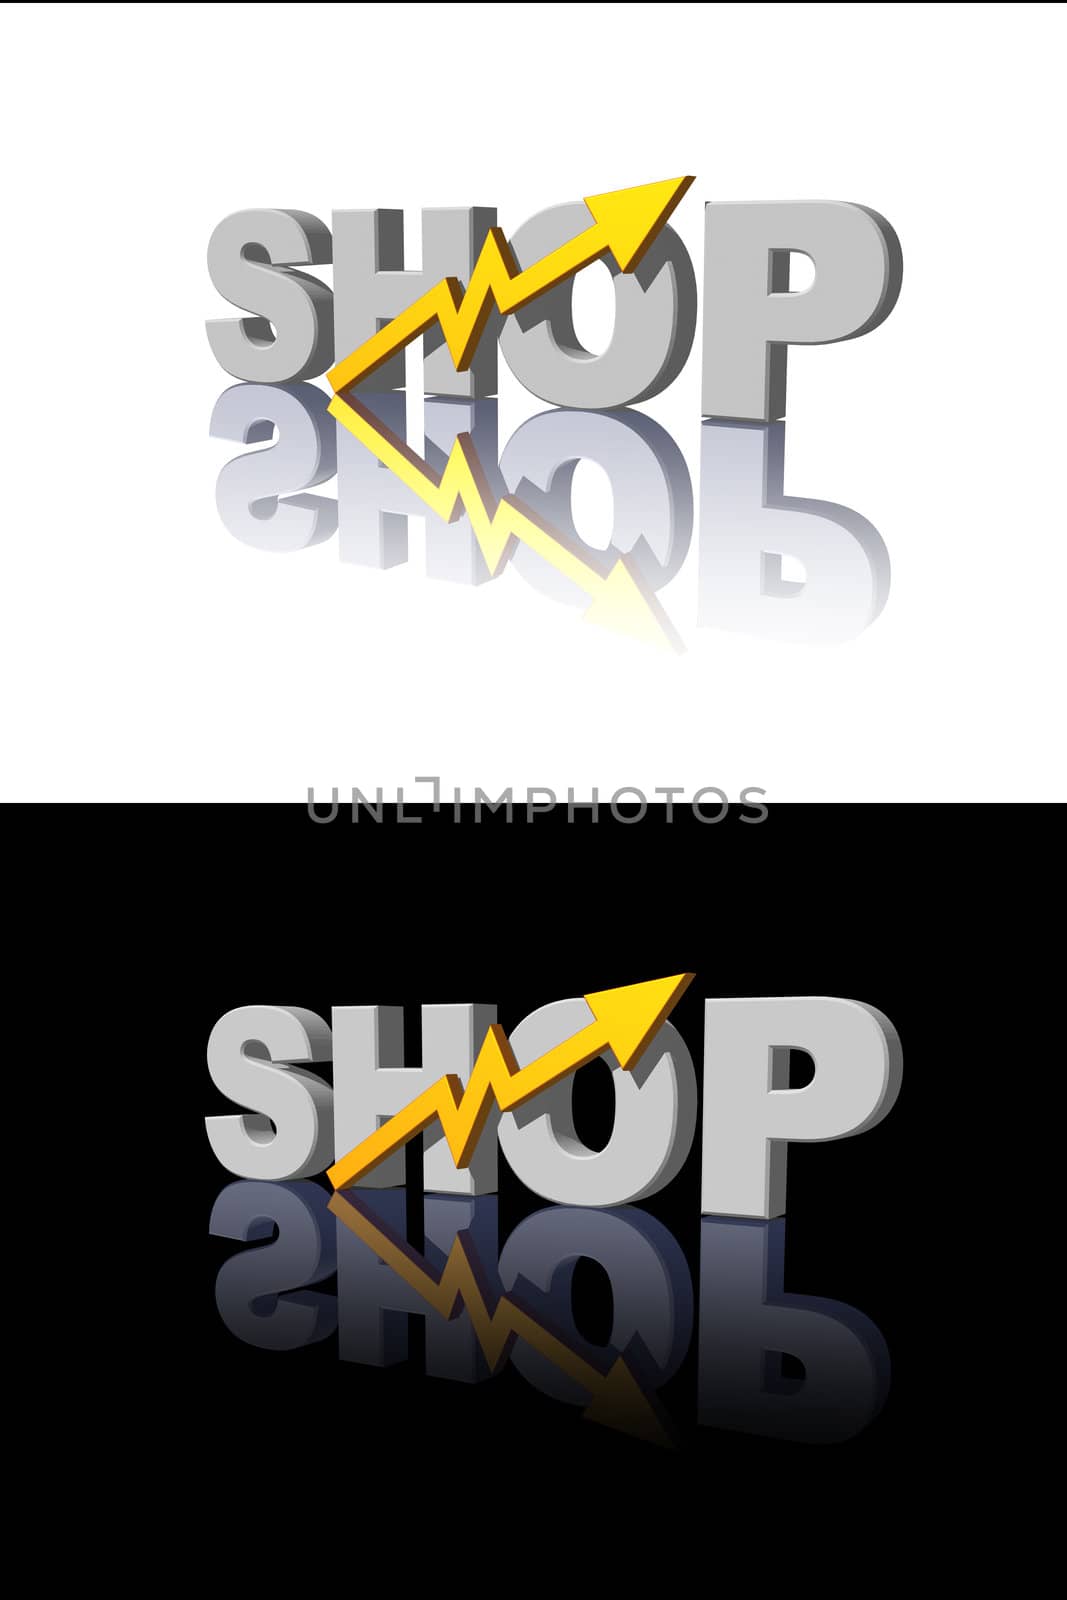 shop text and business curve on black and white background - 3d illustration